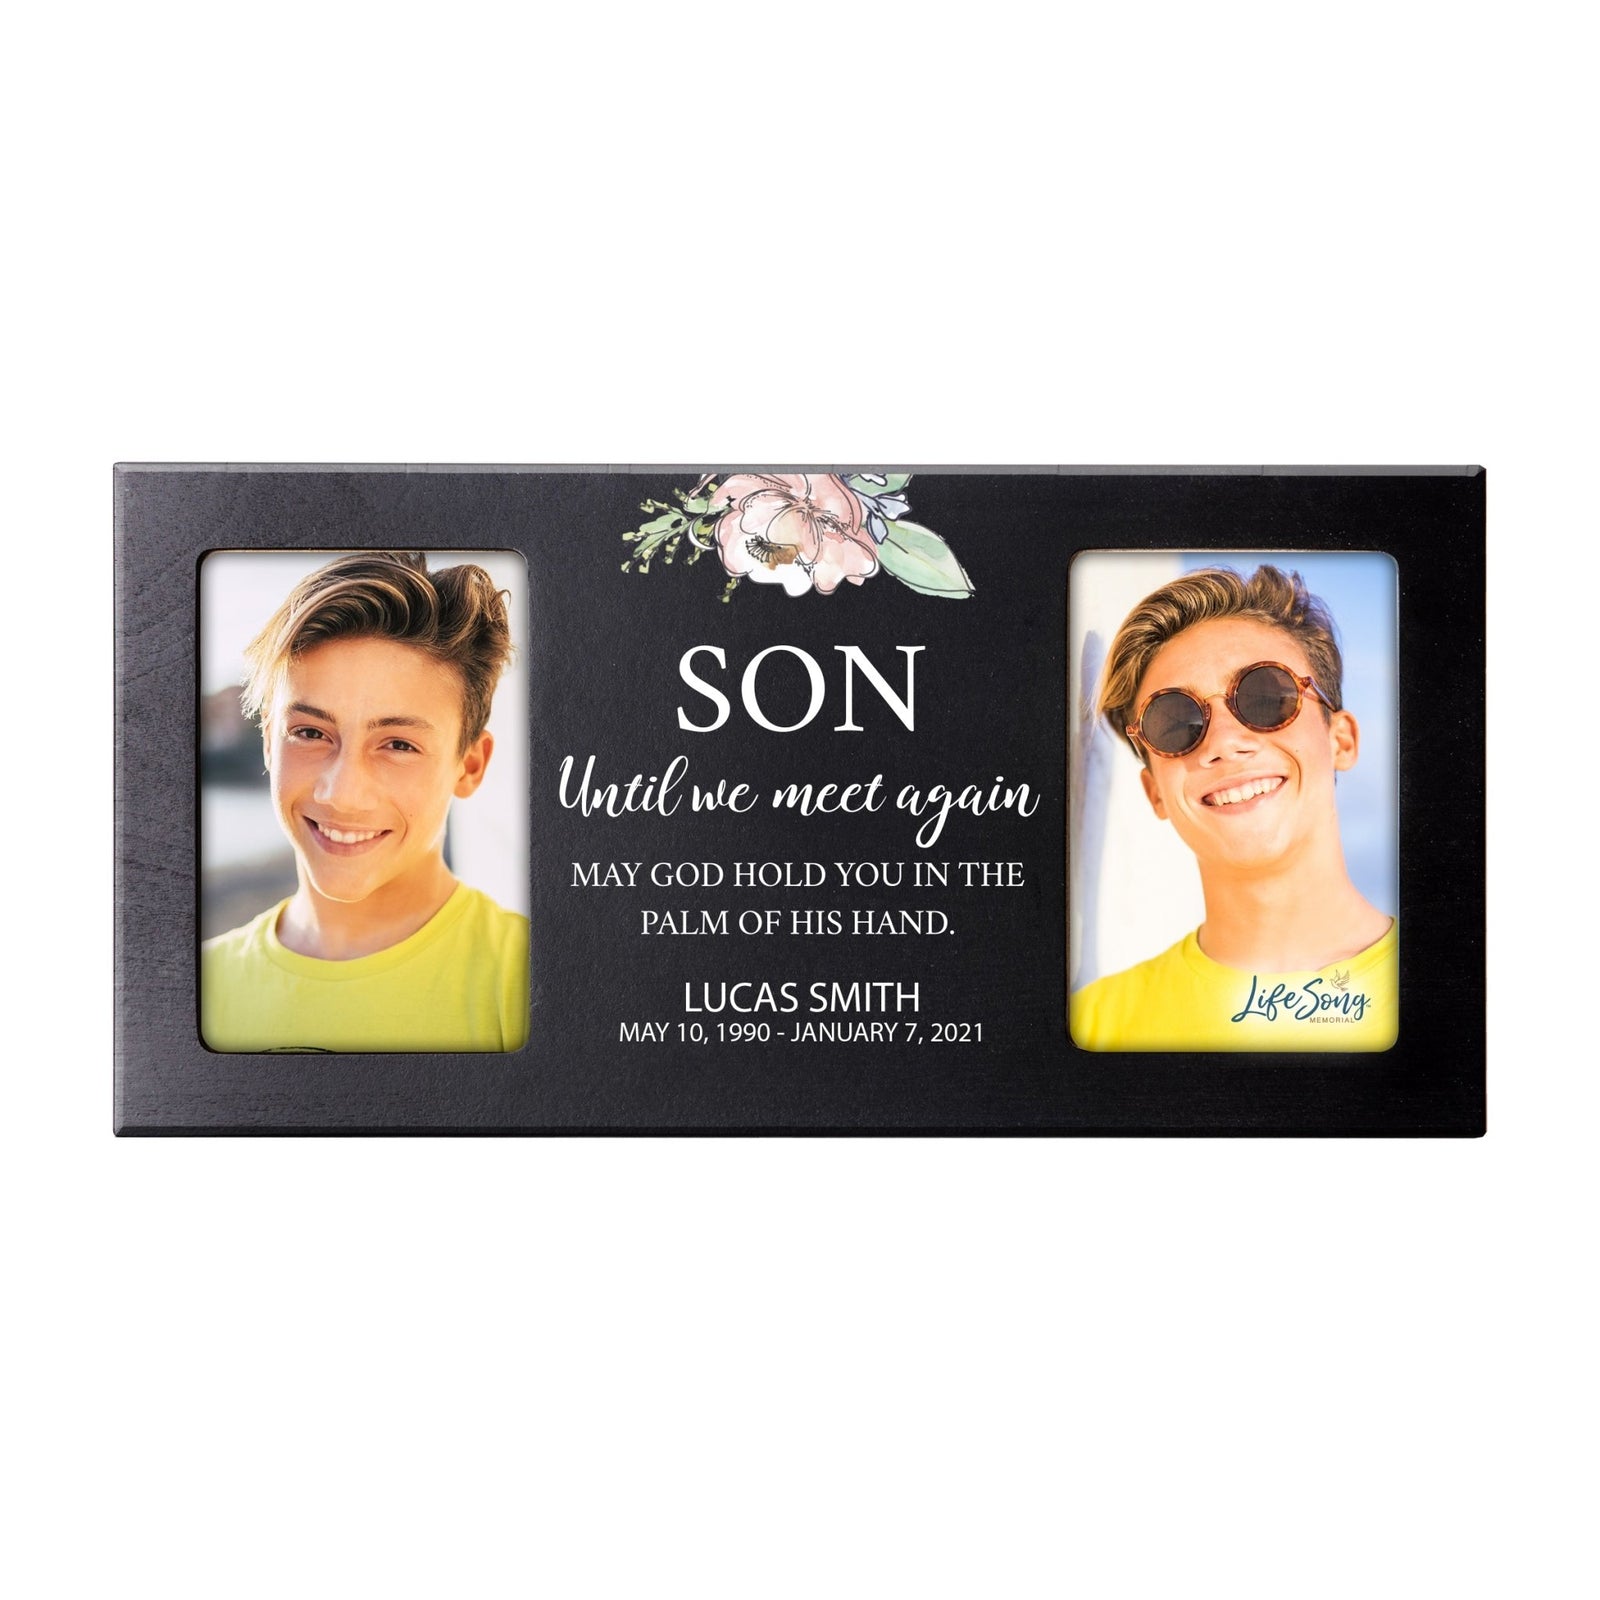 Custom Memorial Picture Frame 16x8in Holds Two 4x6in Photos - Son, Until We, Meet Again - LifeSong Milestones